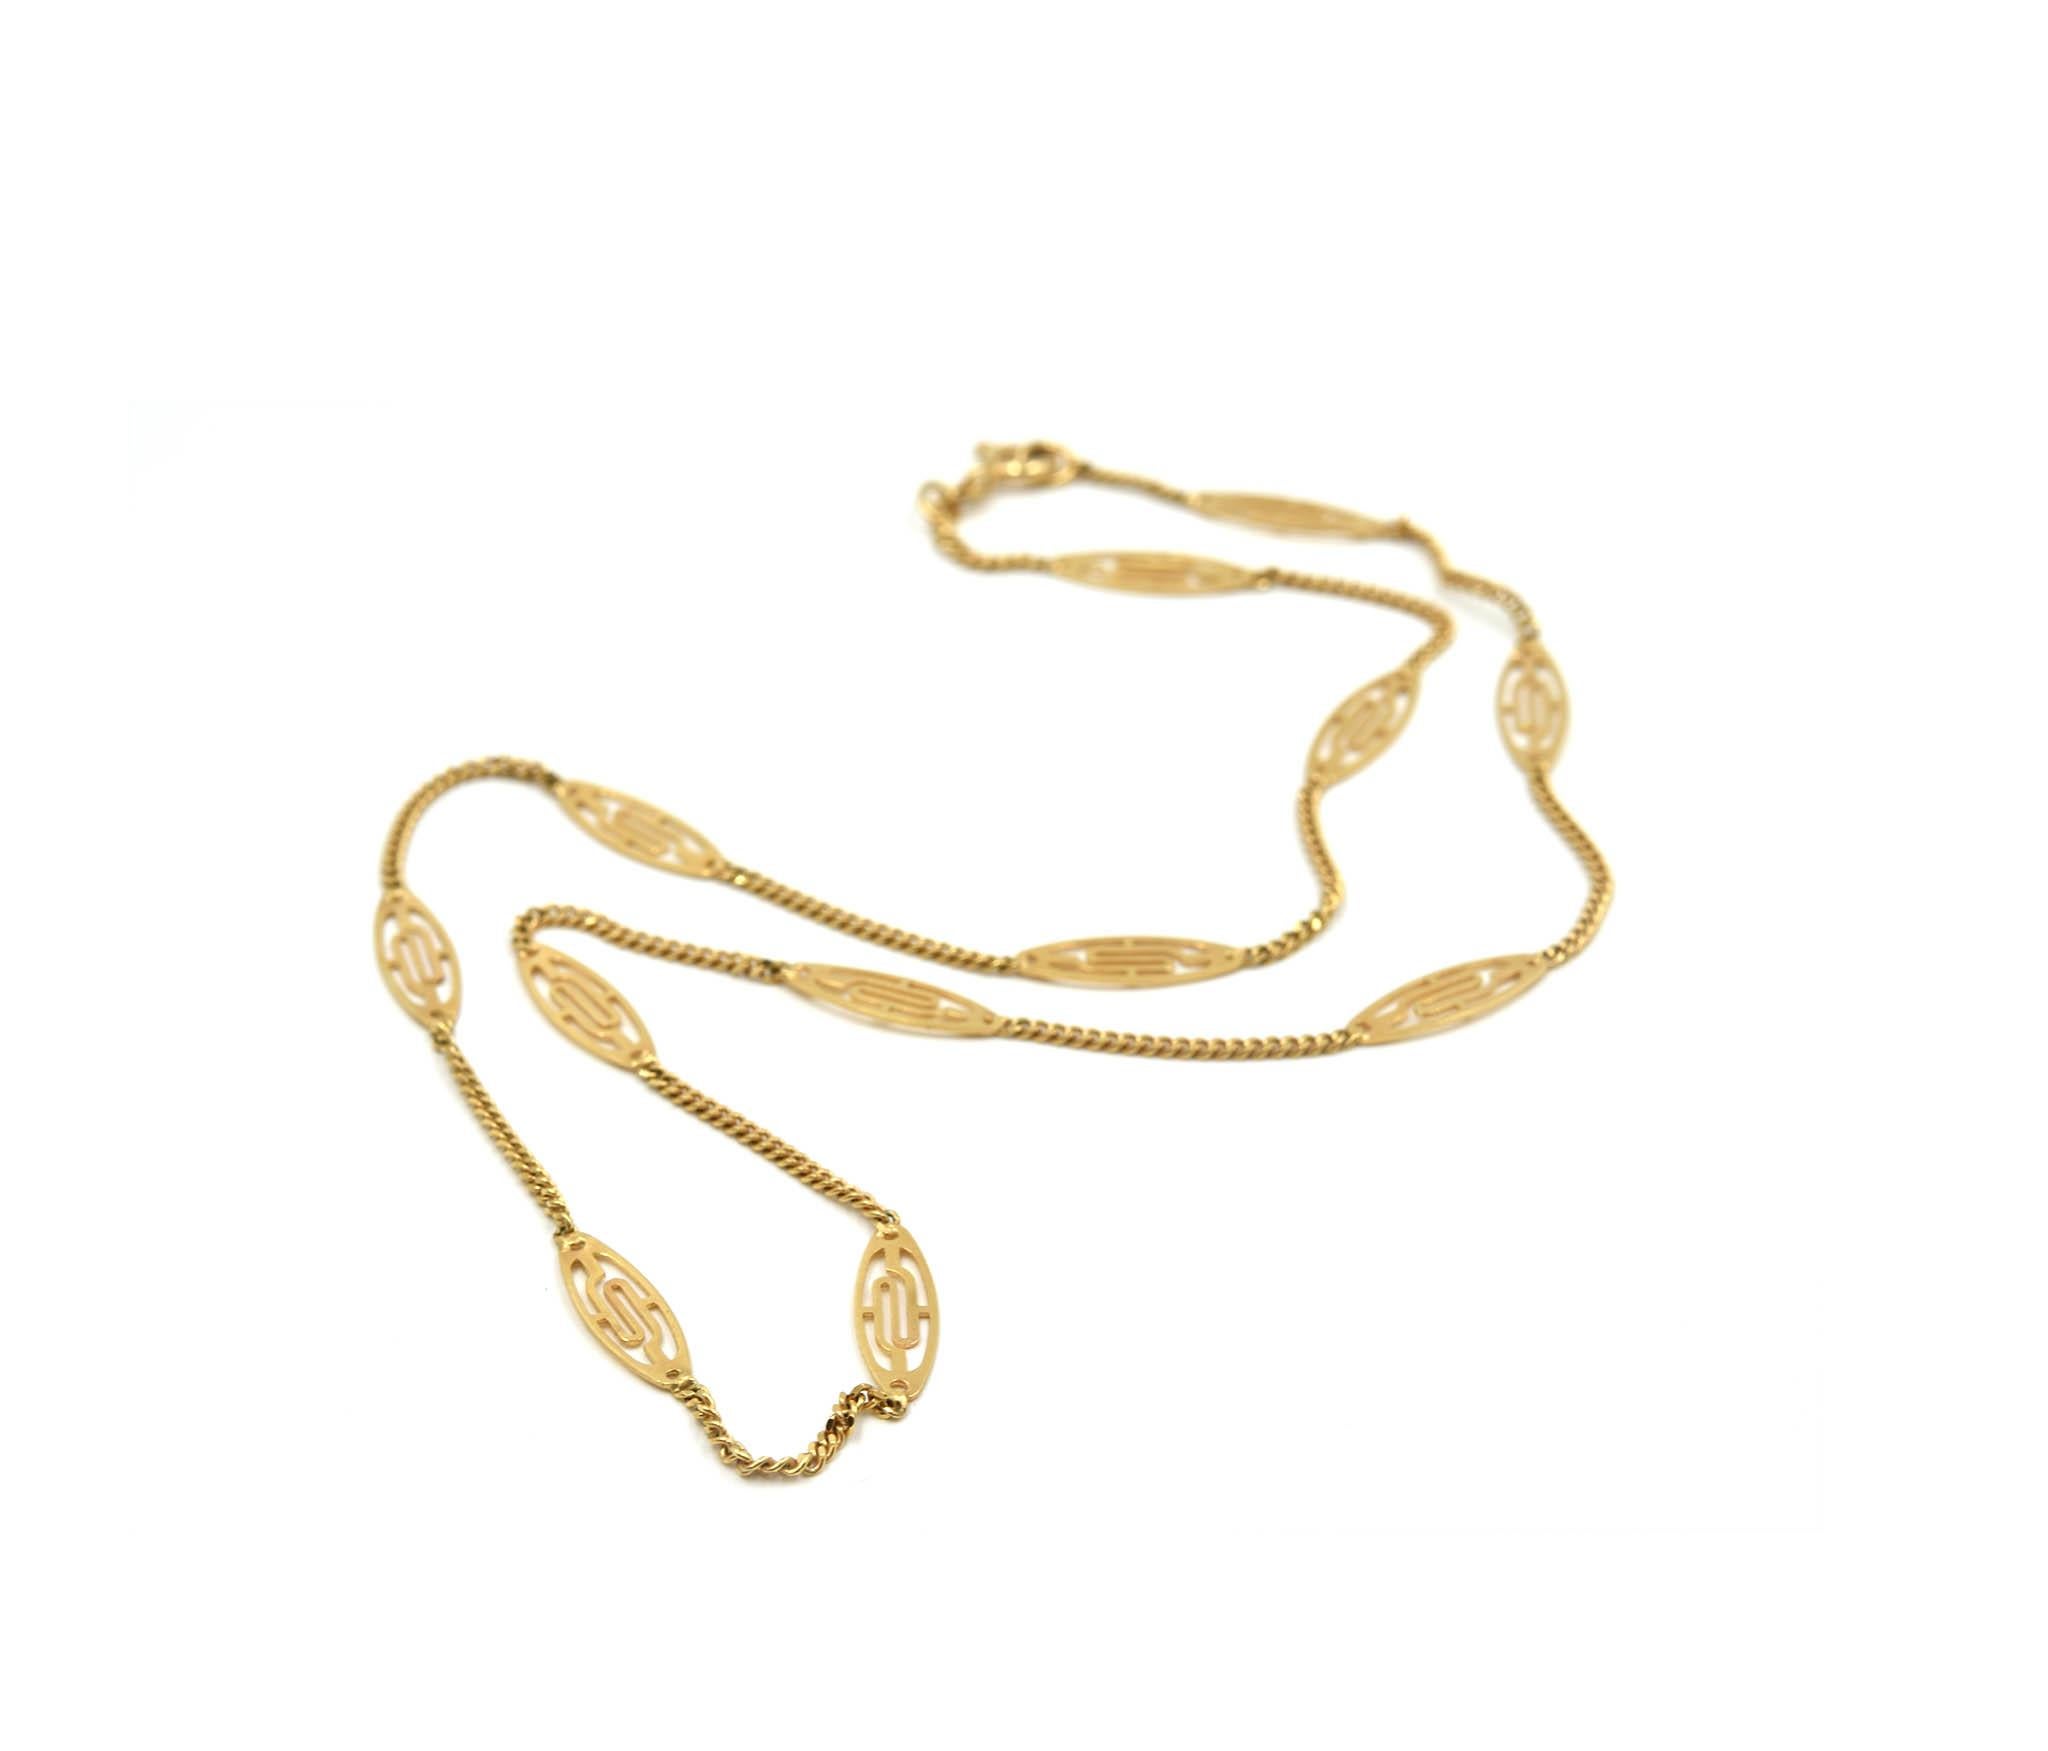 Designer: custom design
Material: 14k yellow gold
Dimensions: necklace measures 18-inch long and 1/4-inch wide
Weight: 5.30 grams
